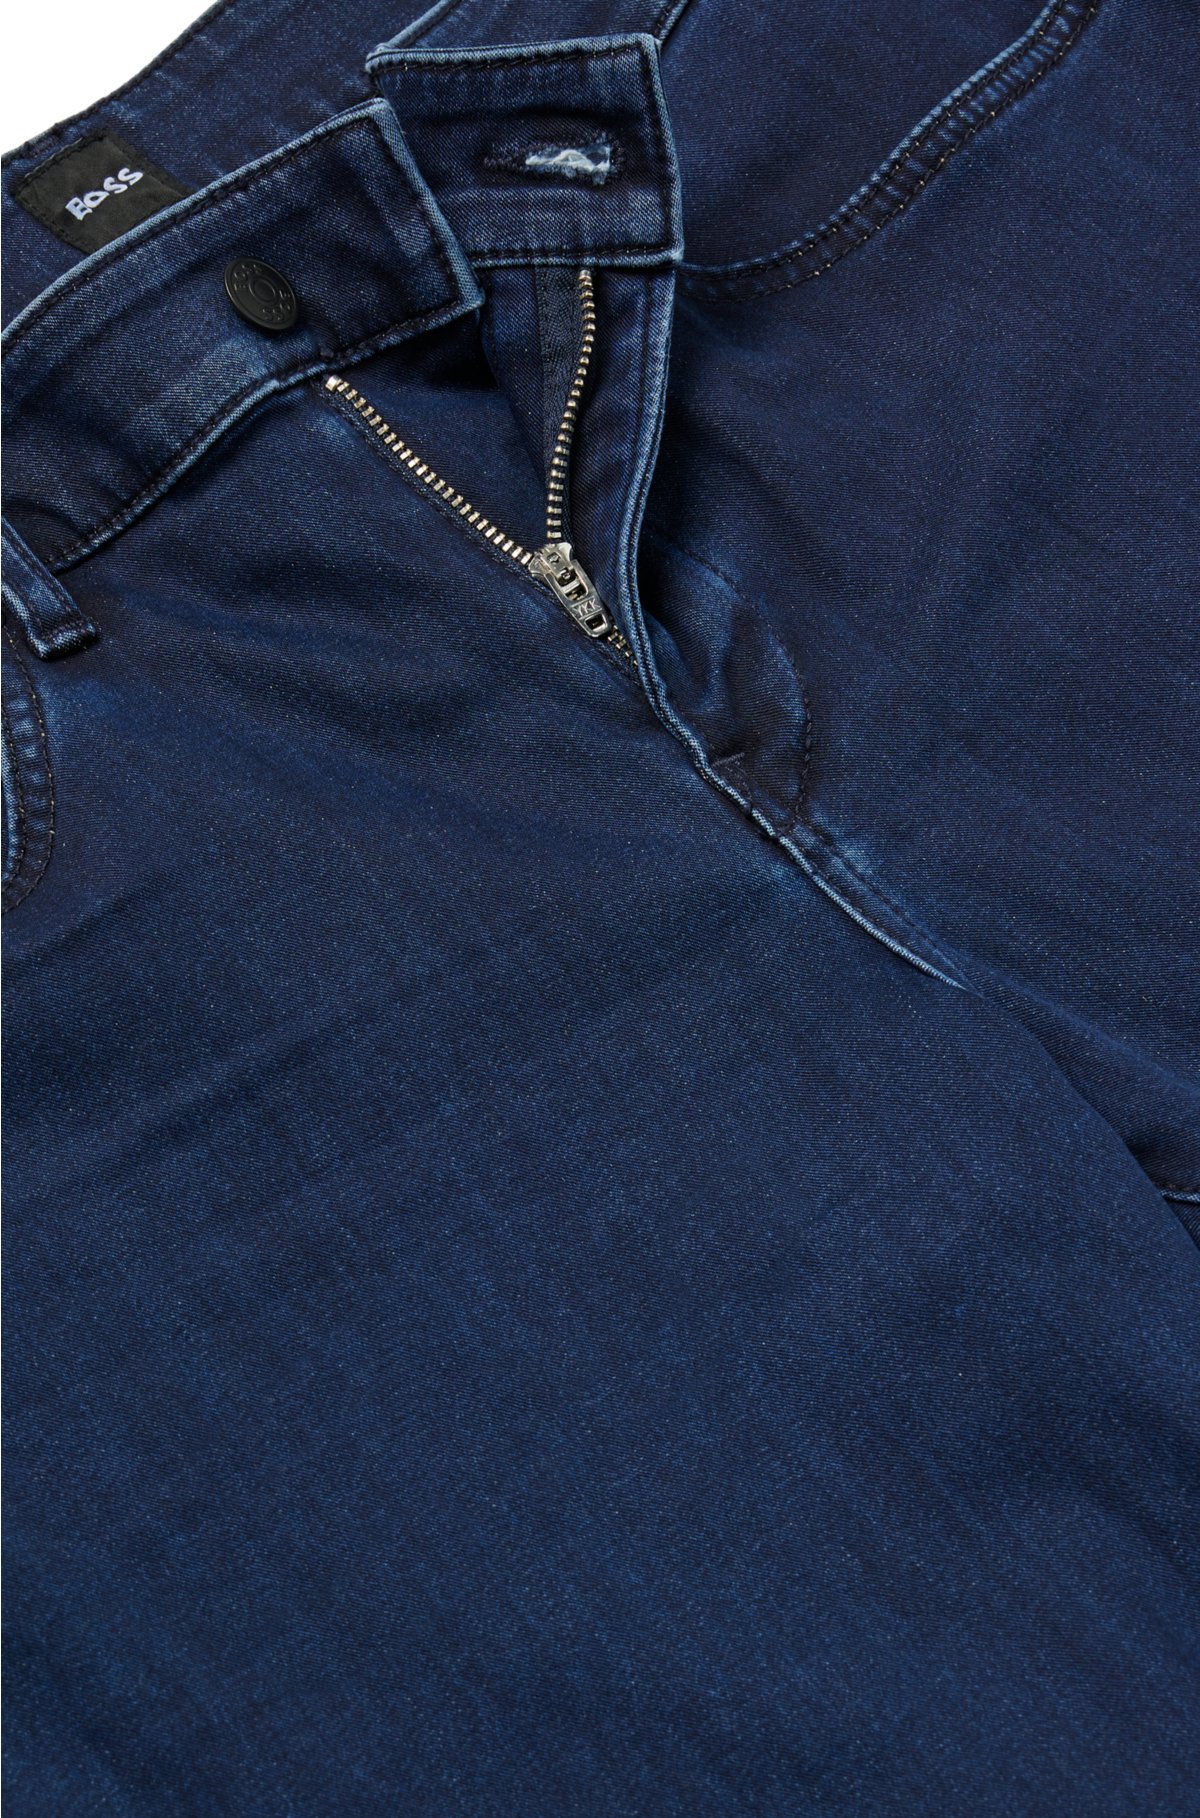 BOSS - Slim-fit jeans in denim blue satin-touch